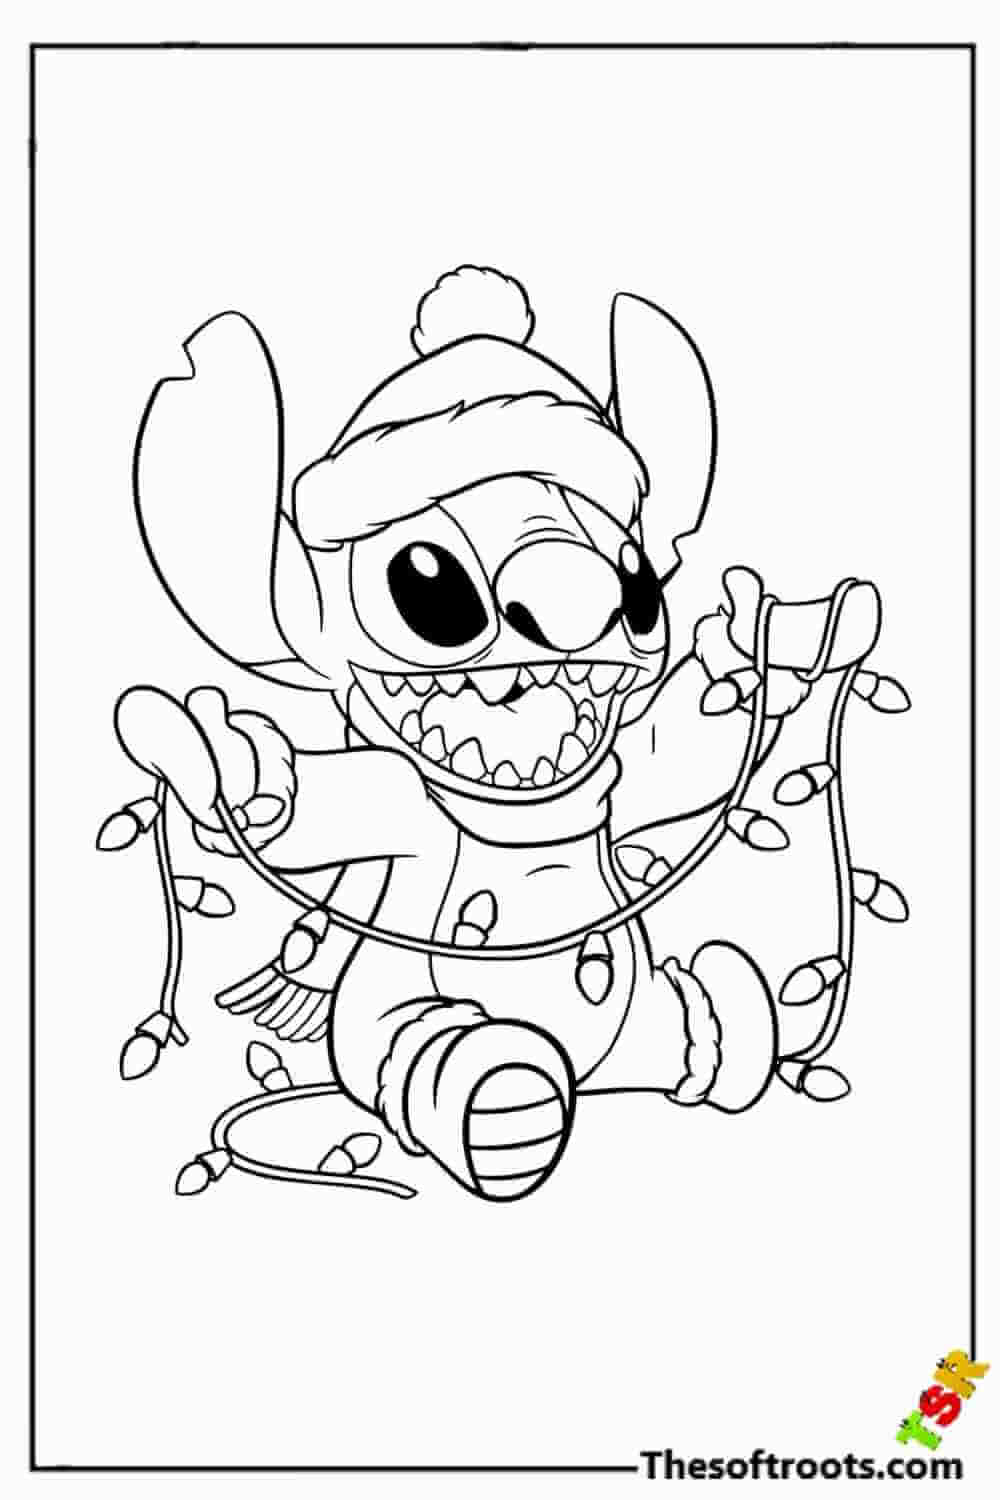 Stitch is ready for Christmas coloring pages